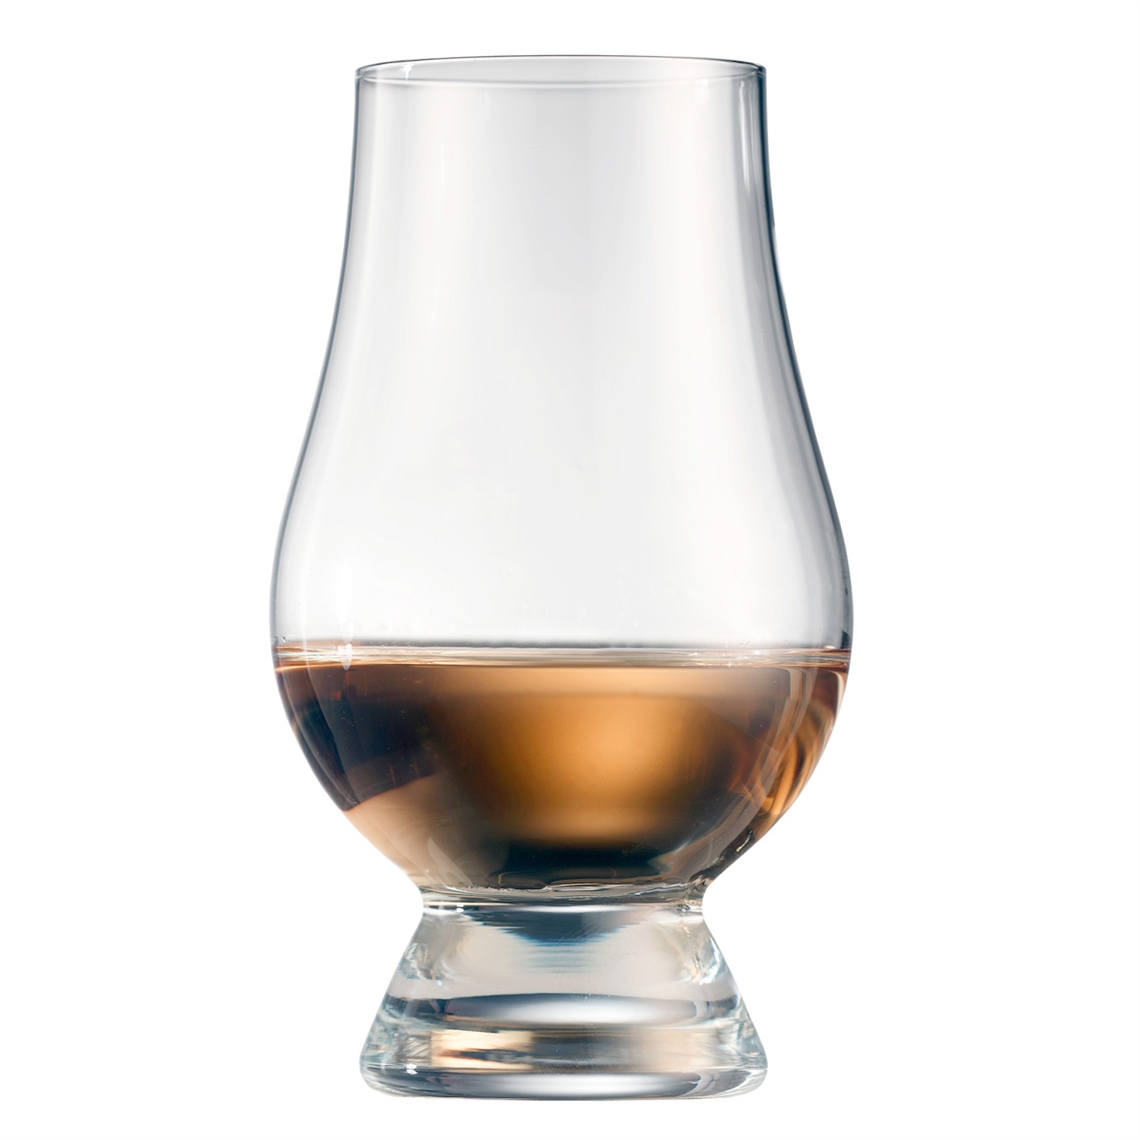 View more schott zwiesel from our Whisky Glasses range